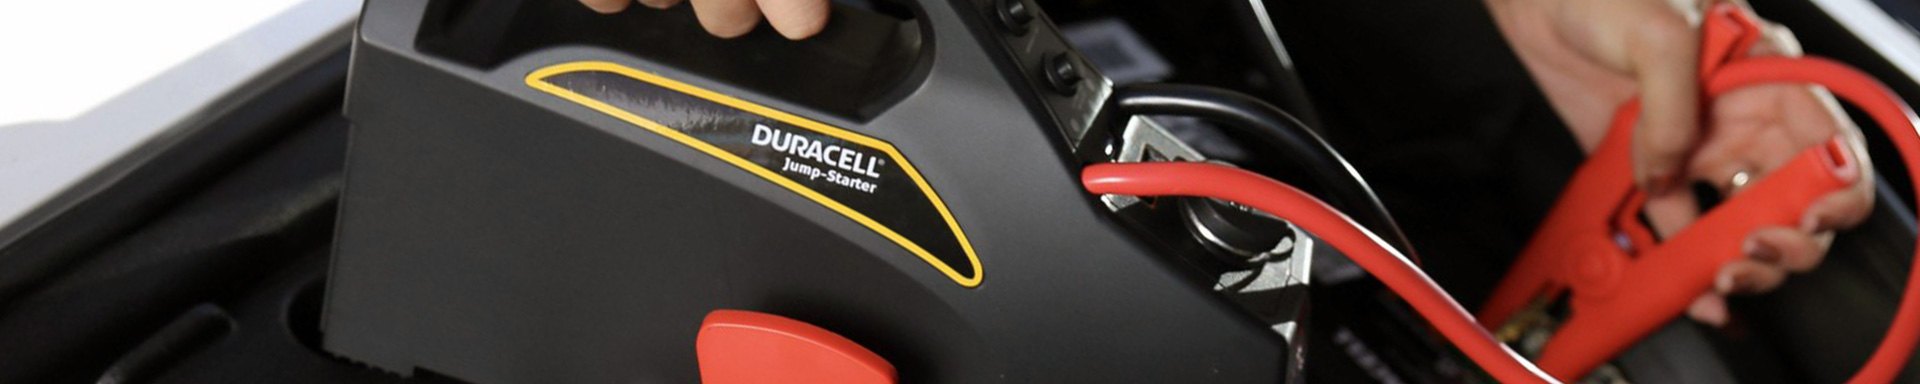 Duracell Battery Chargers & Jump Starters